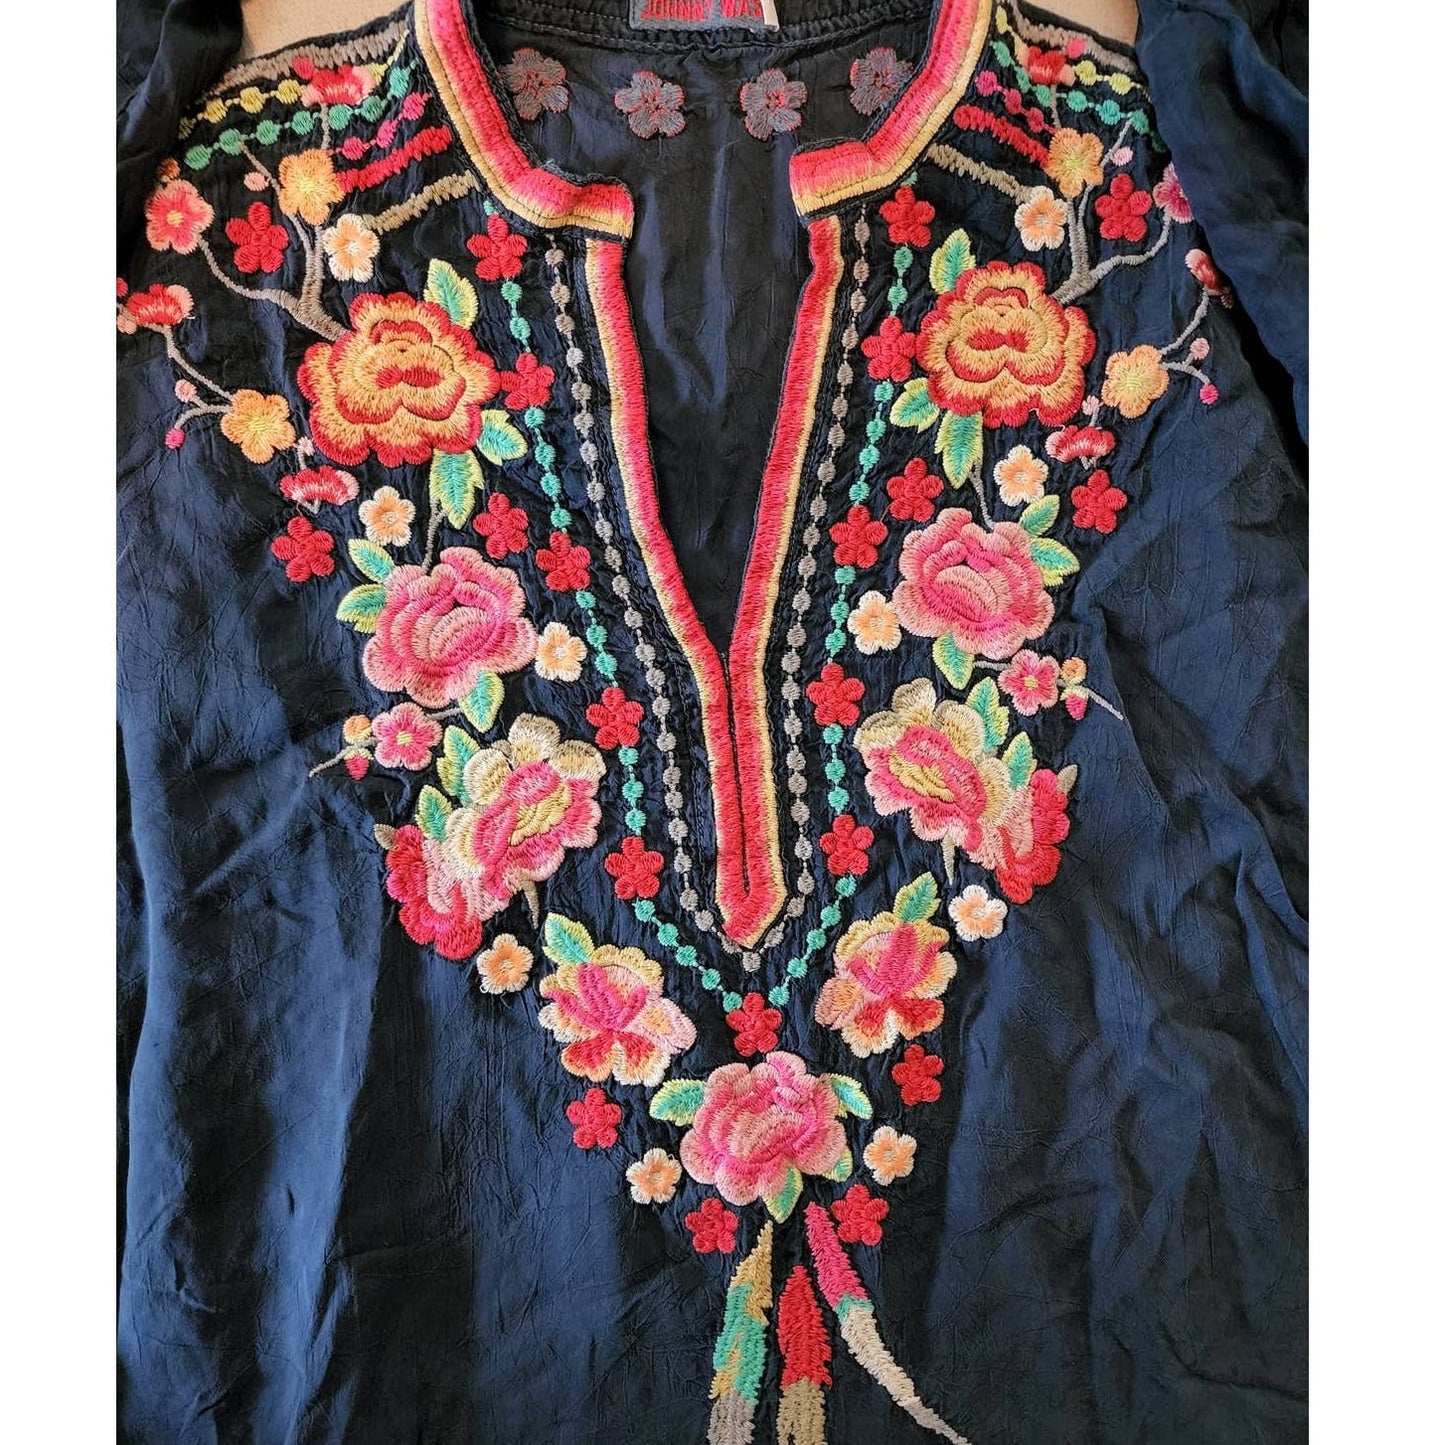 Johnny Was Navy Blue Floral Embroidered Tunic Blouse size small